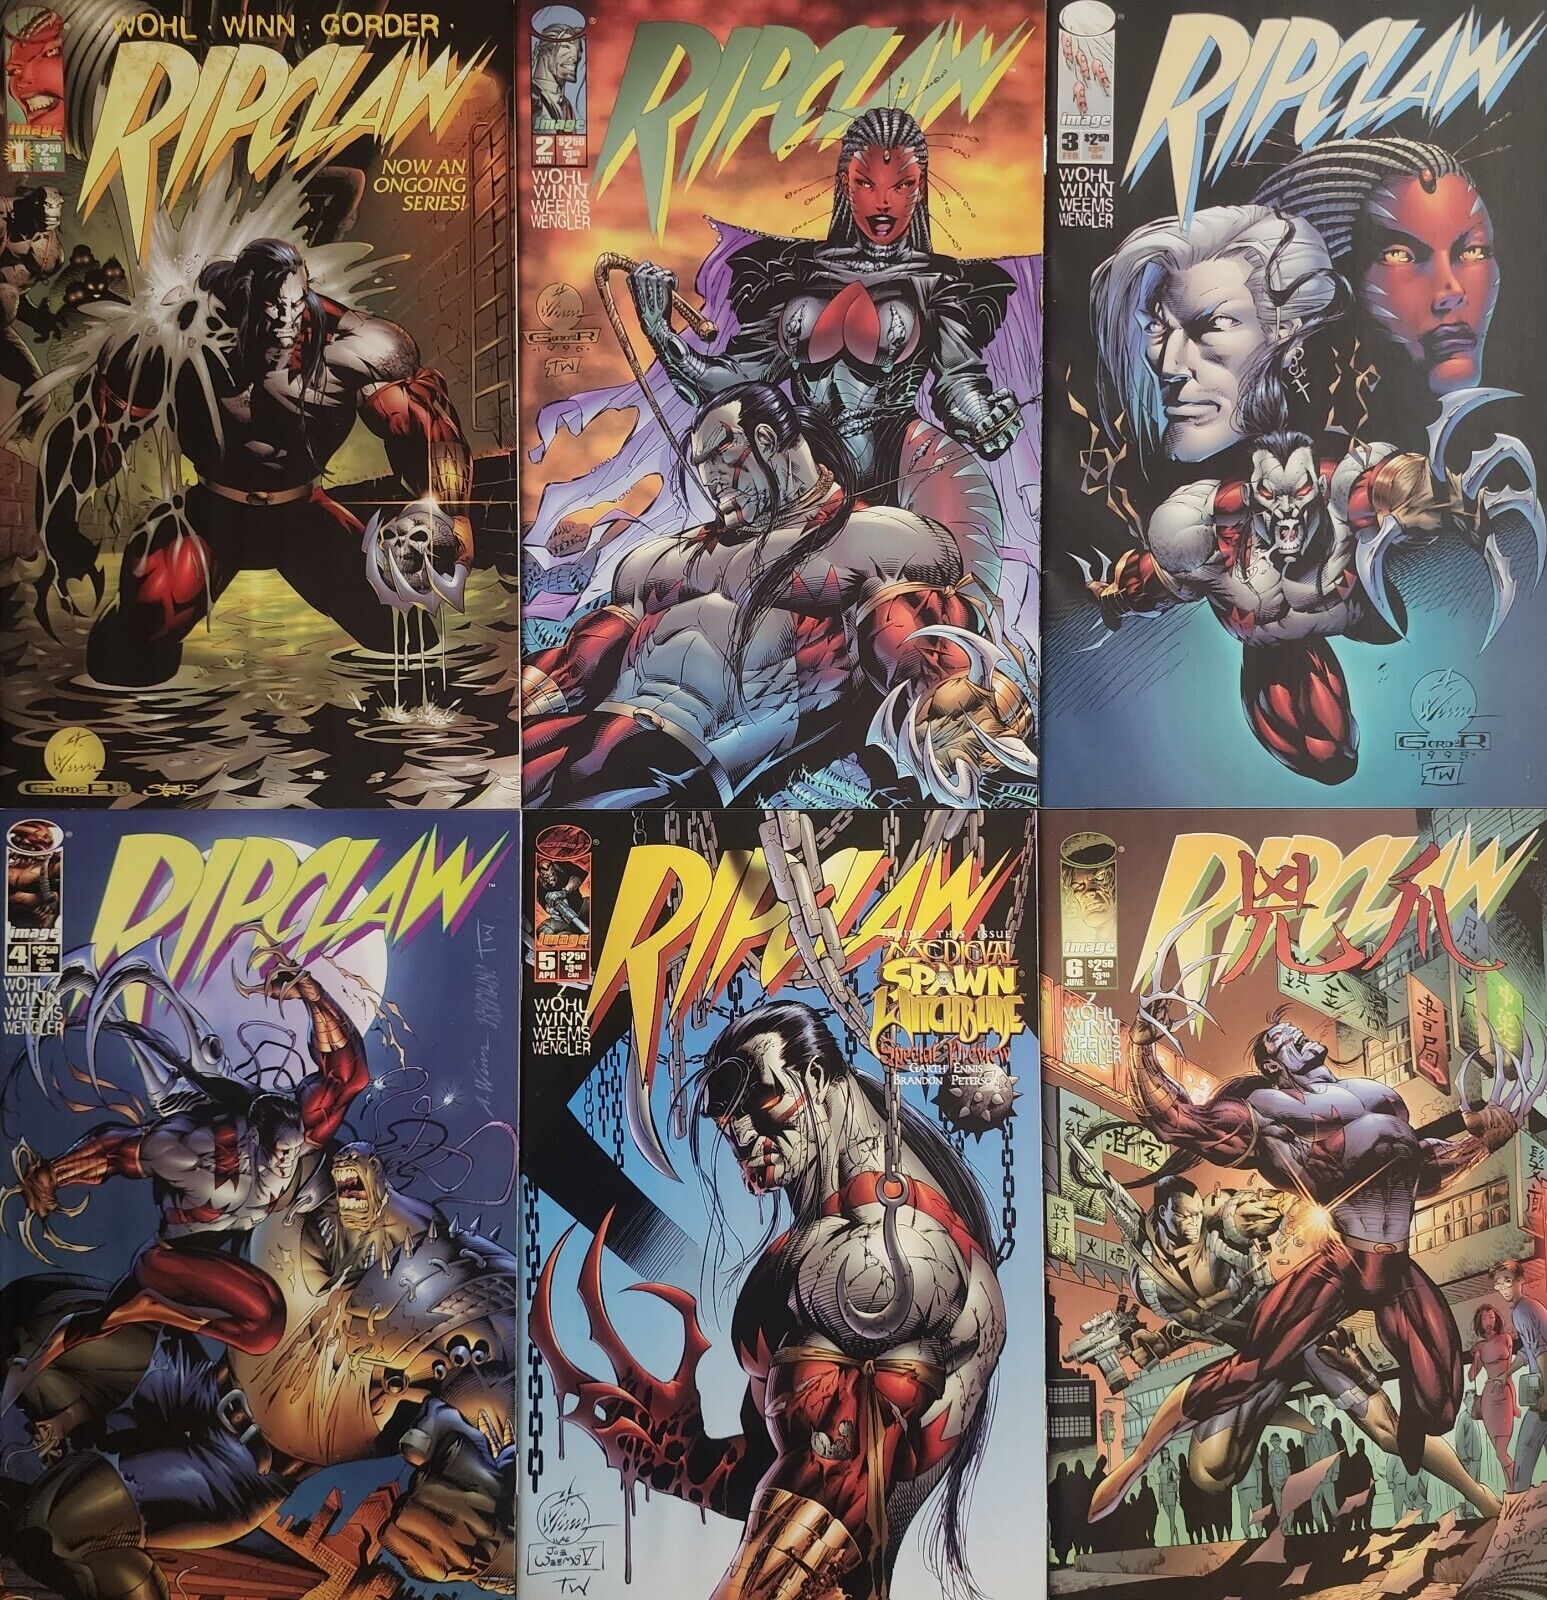 RIPCLAW Vol. 2 Issues #1-6 Image Comic Book Set 1995 Silvestri Wohl Spawn Witch